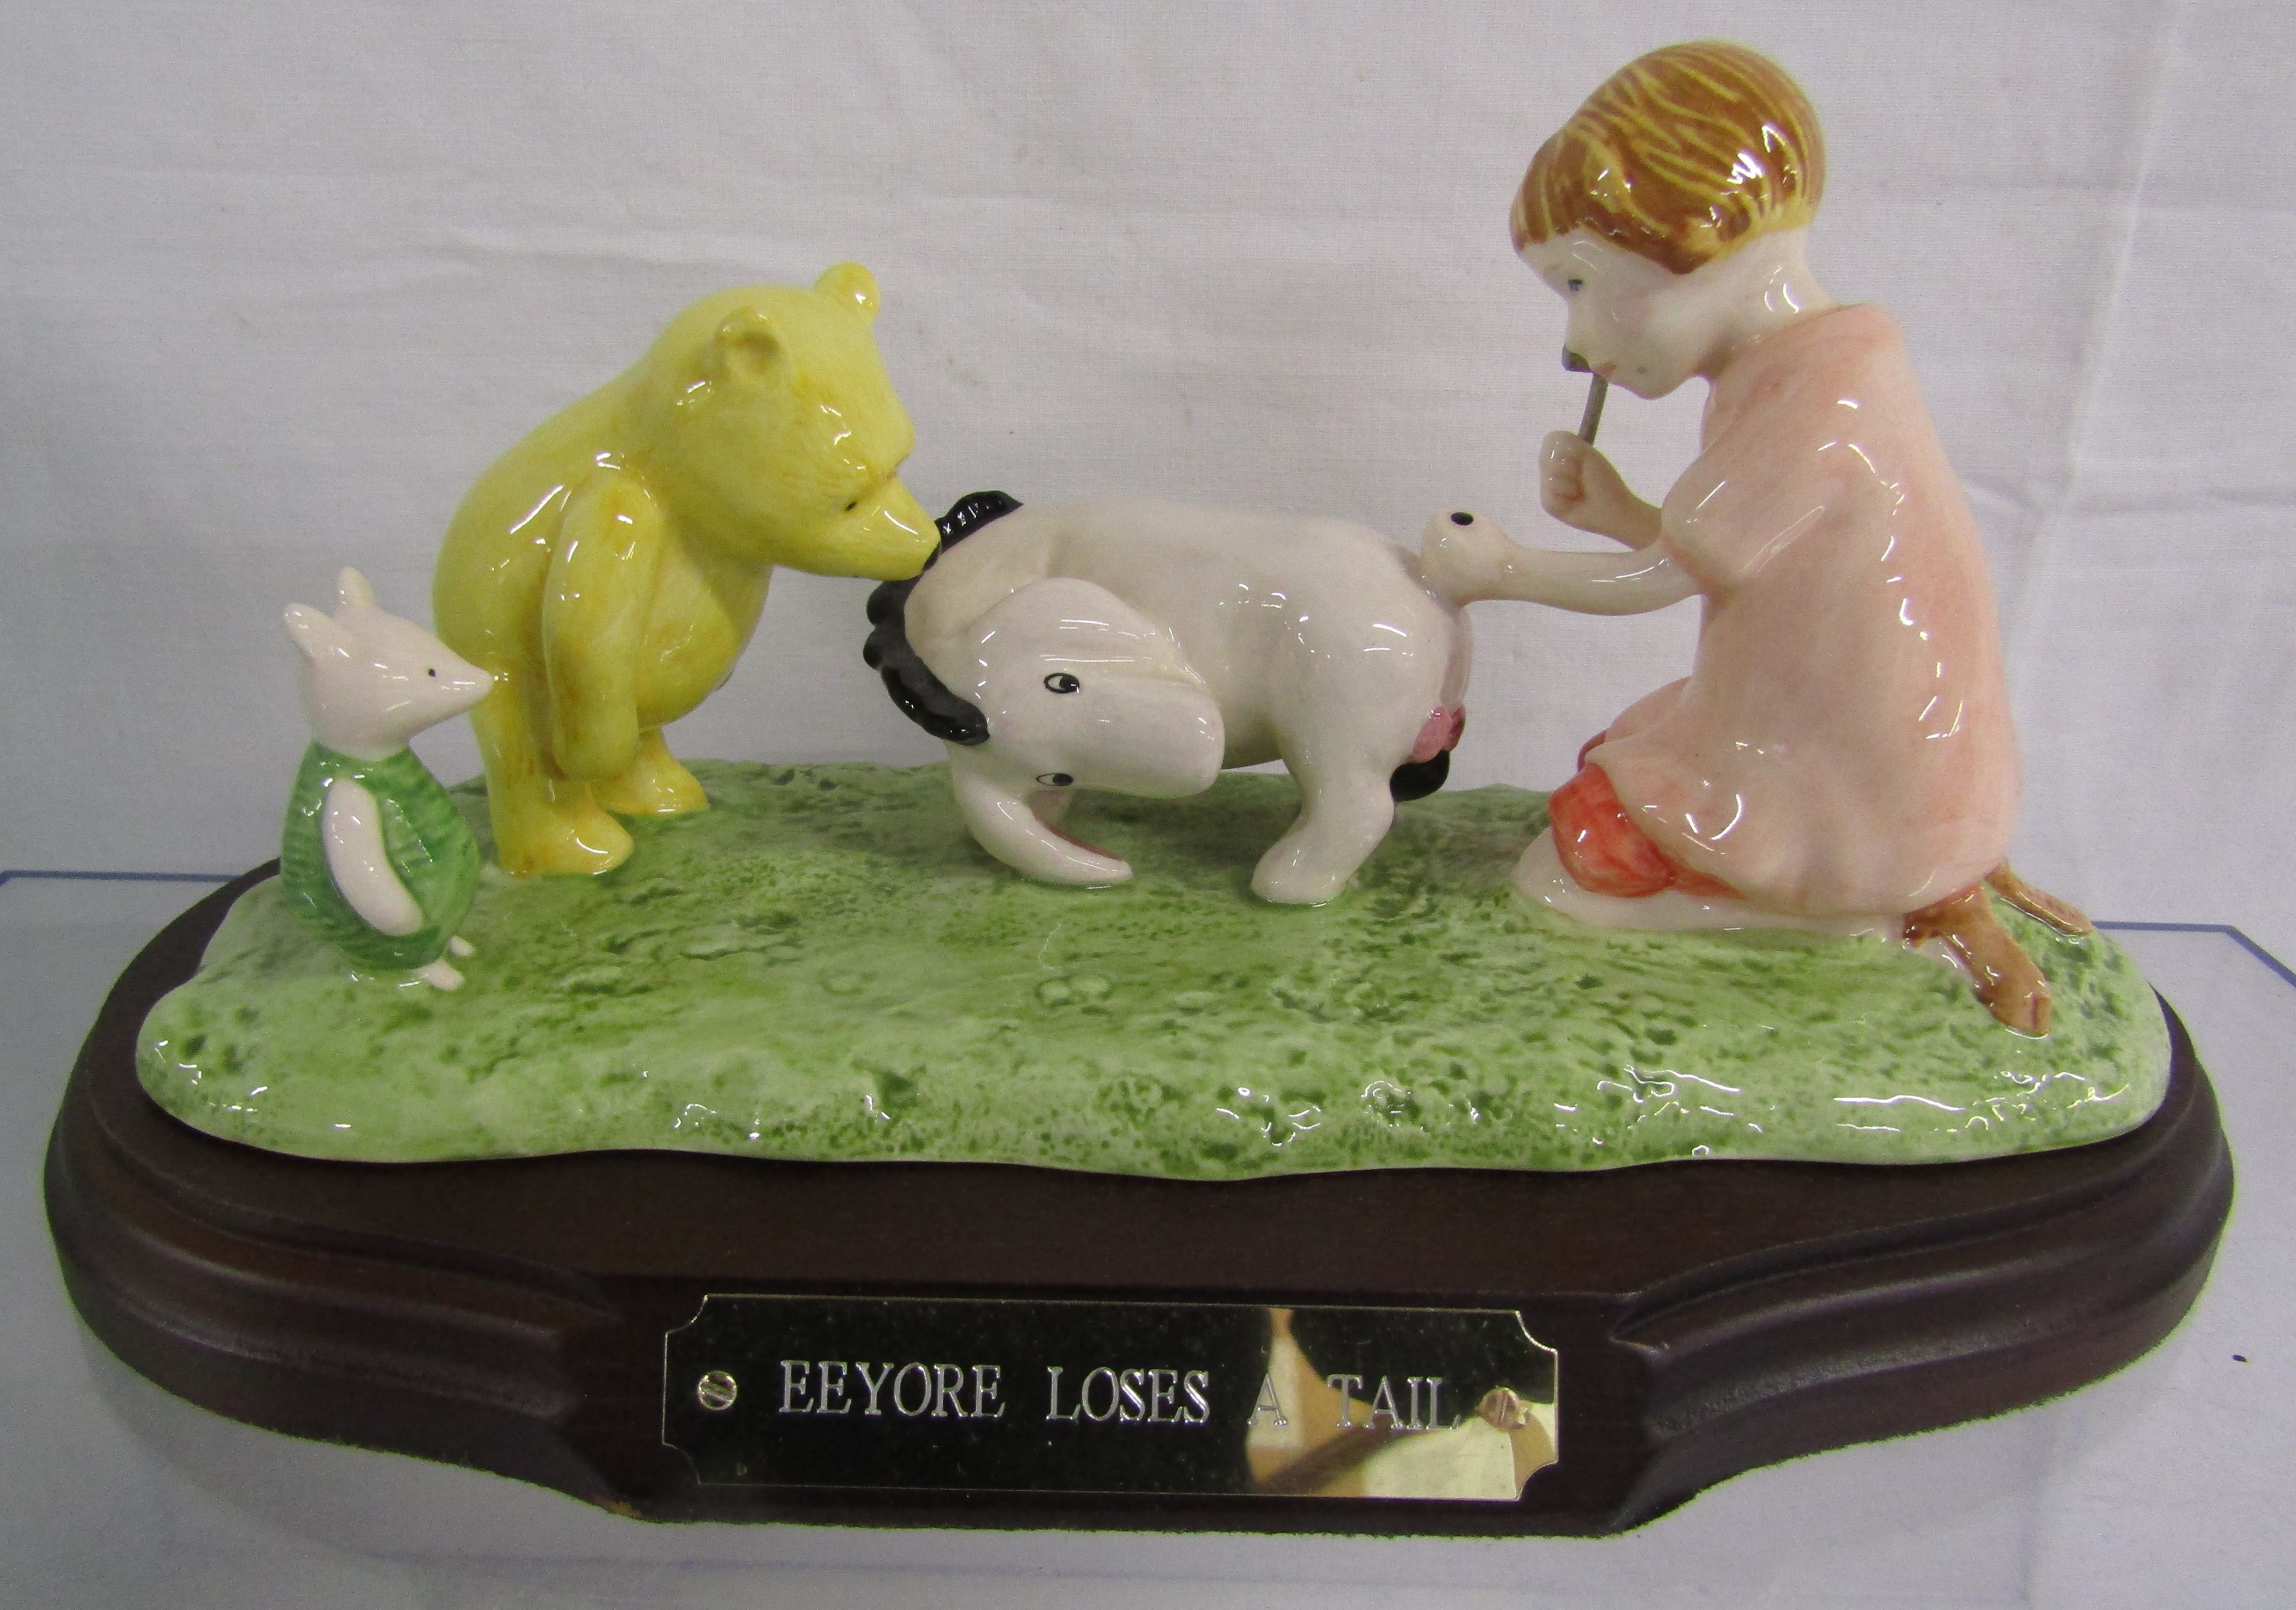 Royal Doulton Winnie the Pooh Collection Figurines - Image 2 of 11